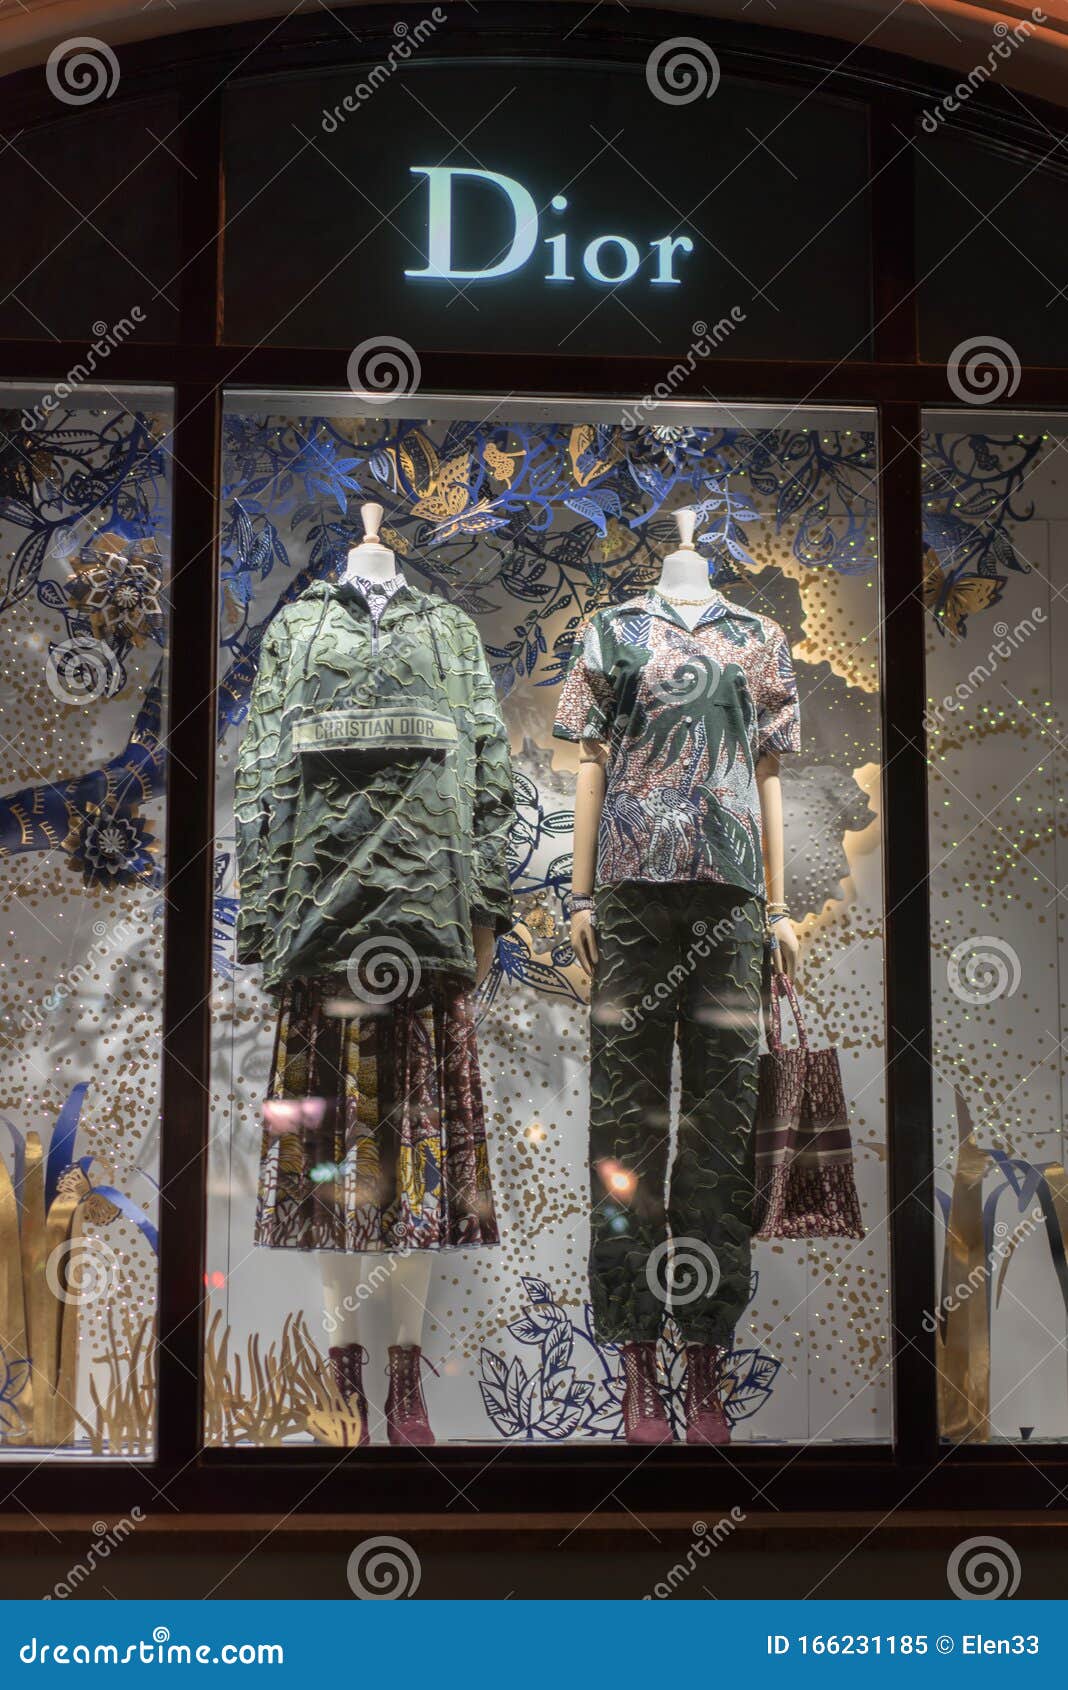 Vitrine louis vuitton hi-res stock photography and images - Alamy